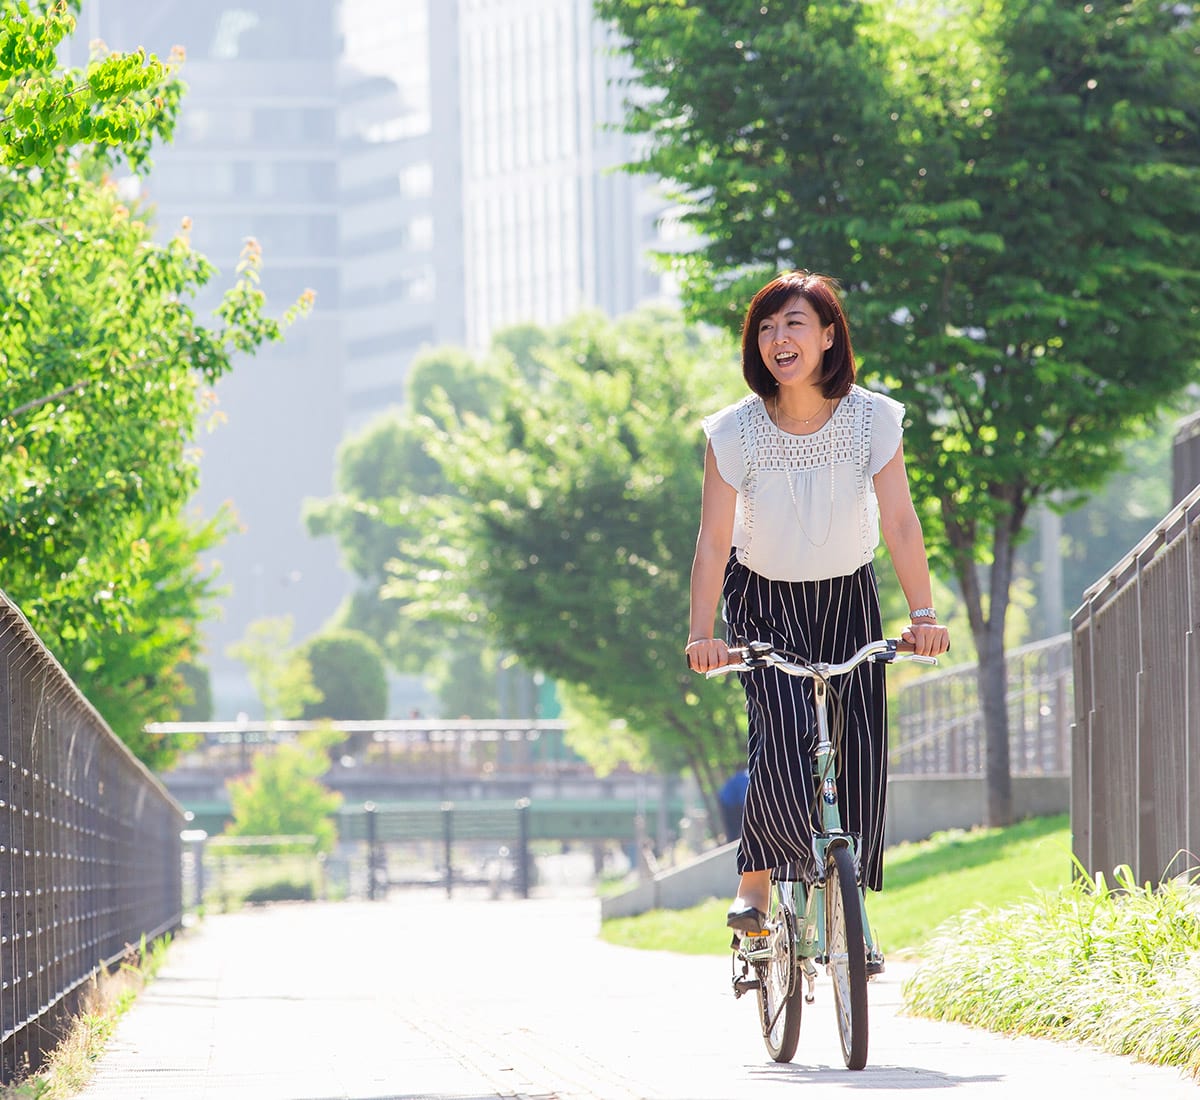 A woman riding her bicycle through a city park